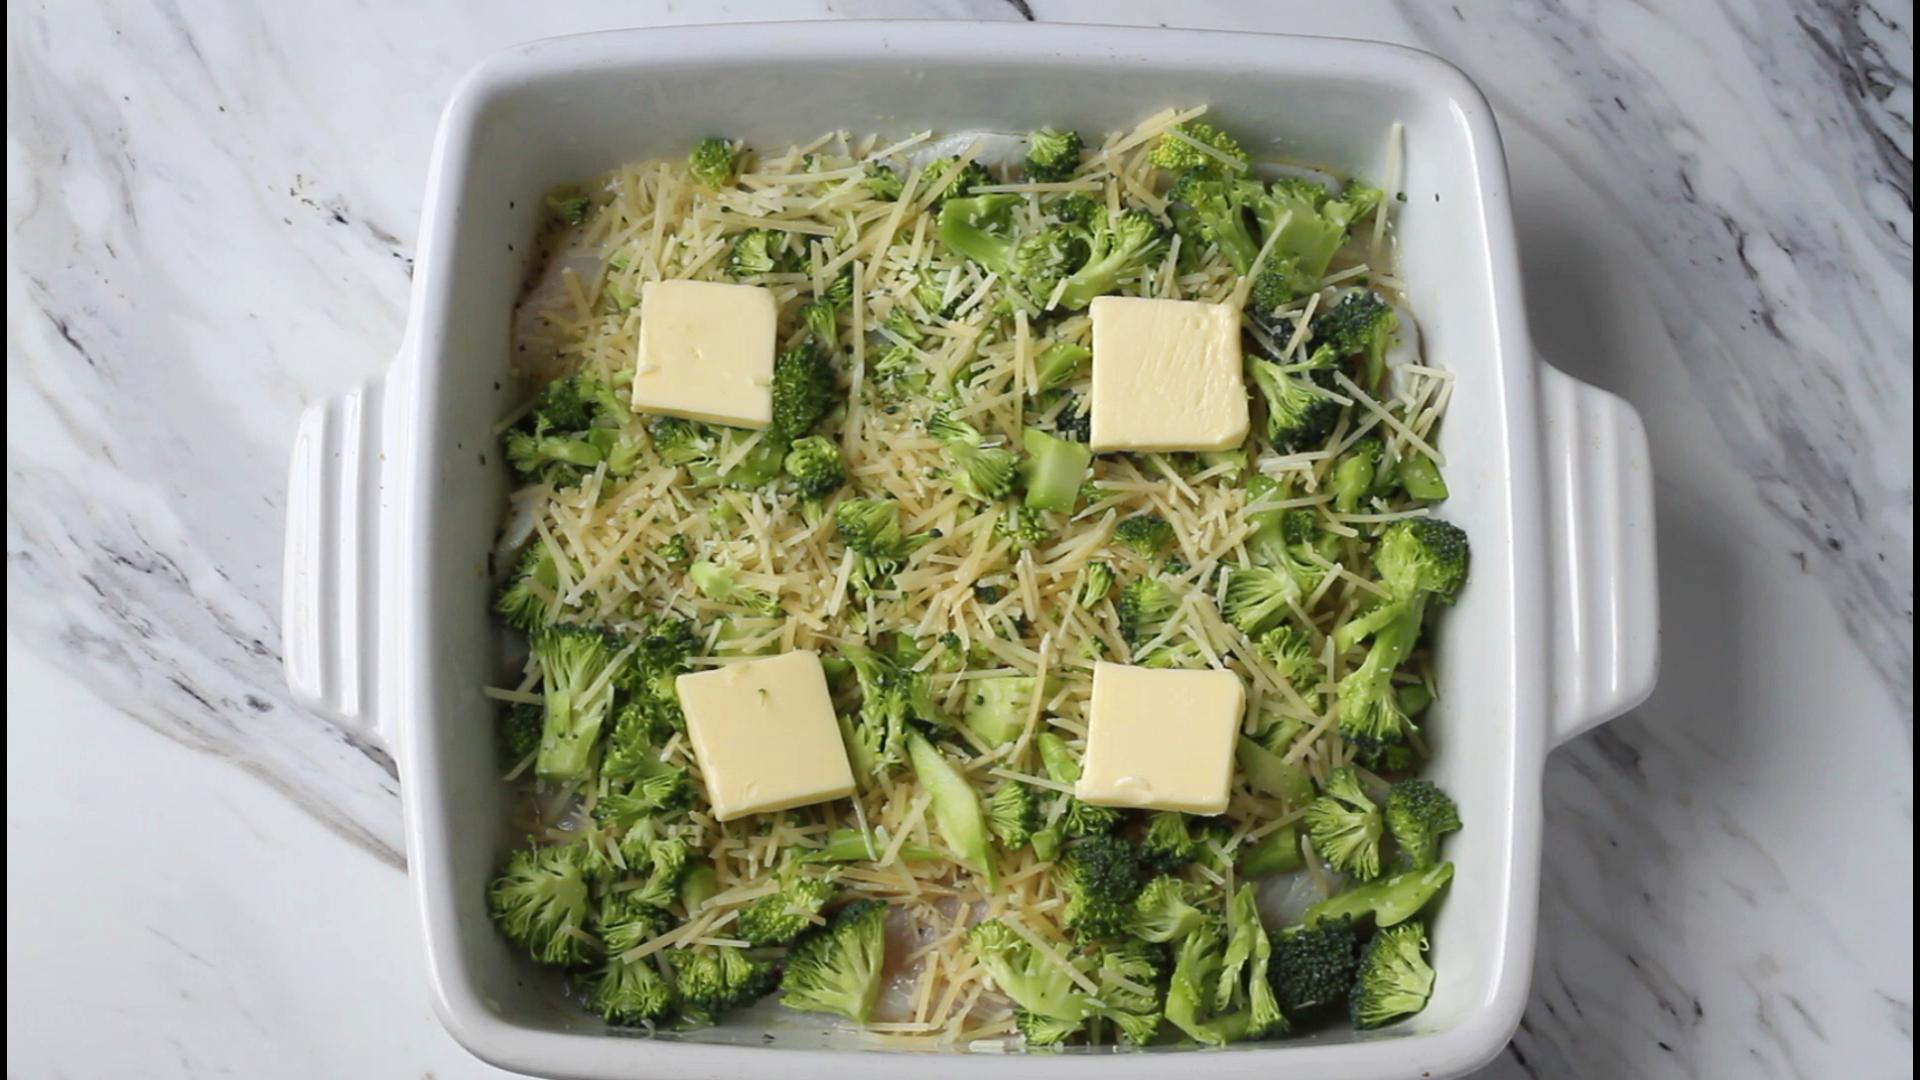 Raw fish with broccoli, shredded cheese and slices of butter.